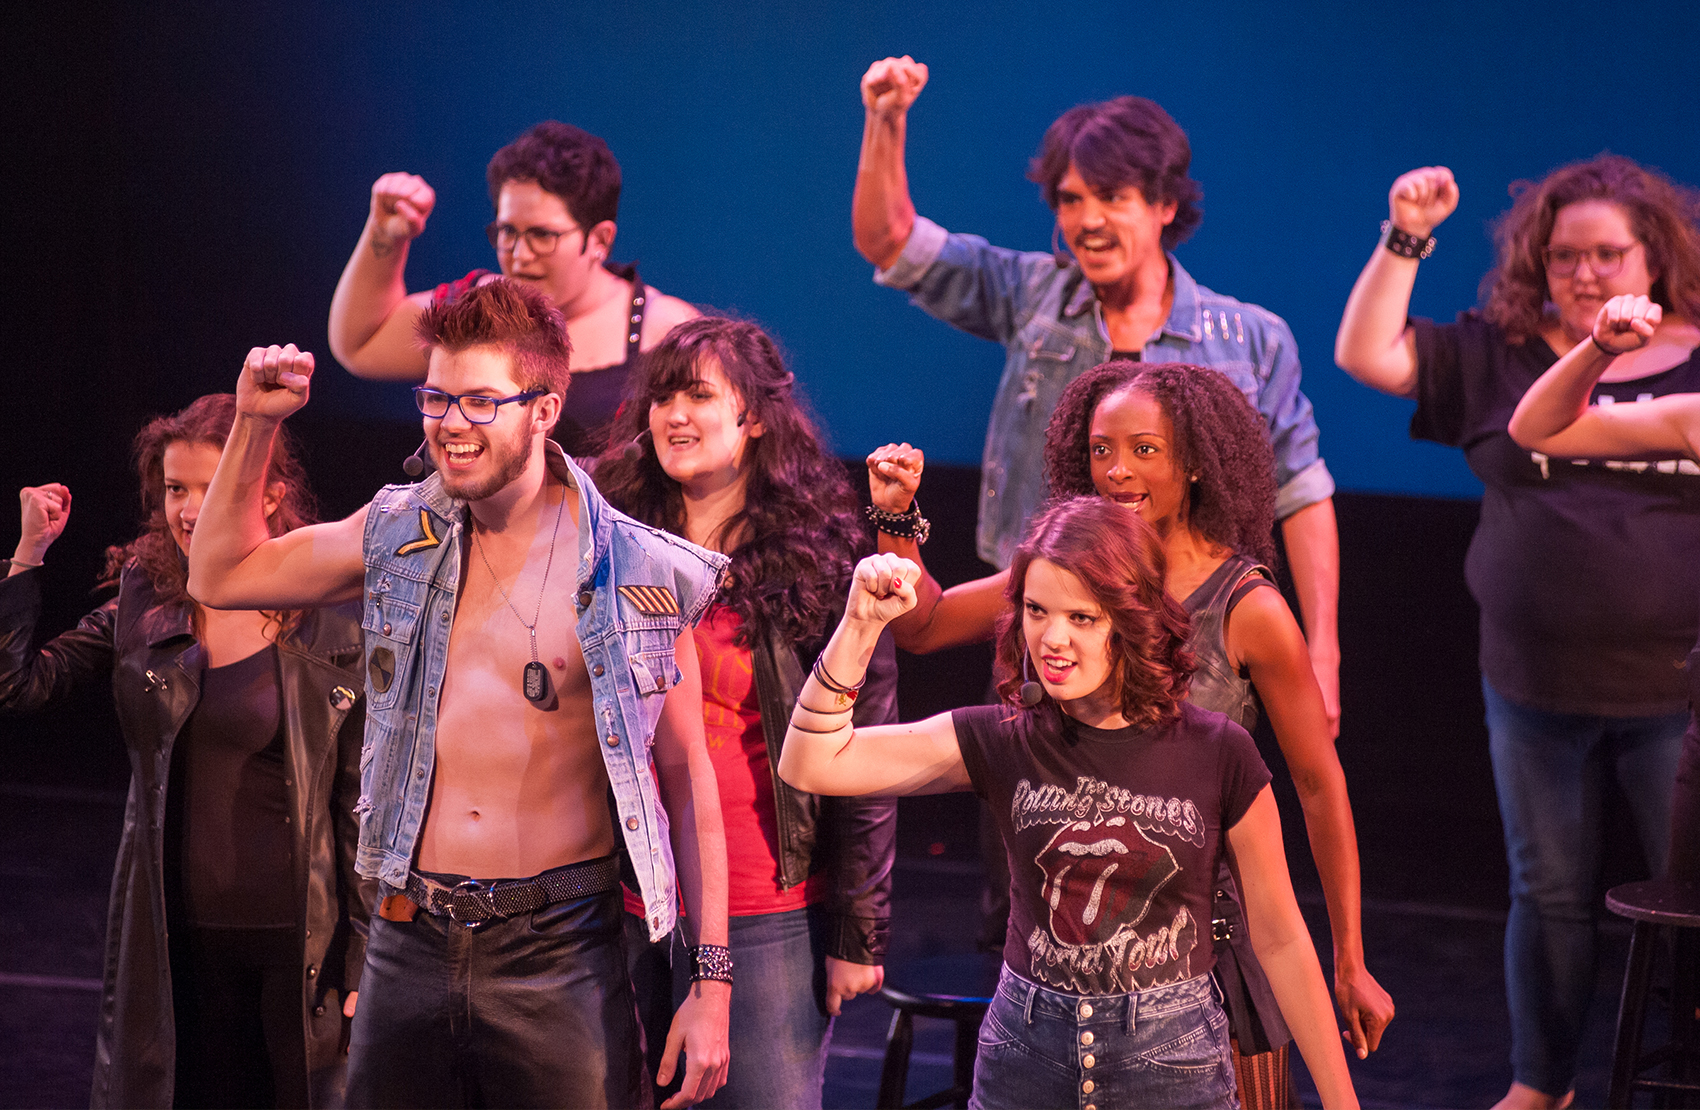    Another crowd of young men and women, dressed in alternative punk dark and denim clothing, sing toward the audience and have their right fists raised, arms at a 90-degree angle.  